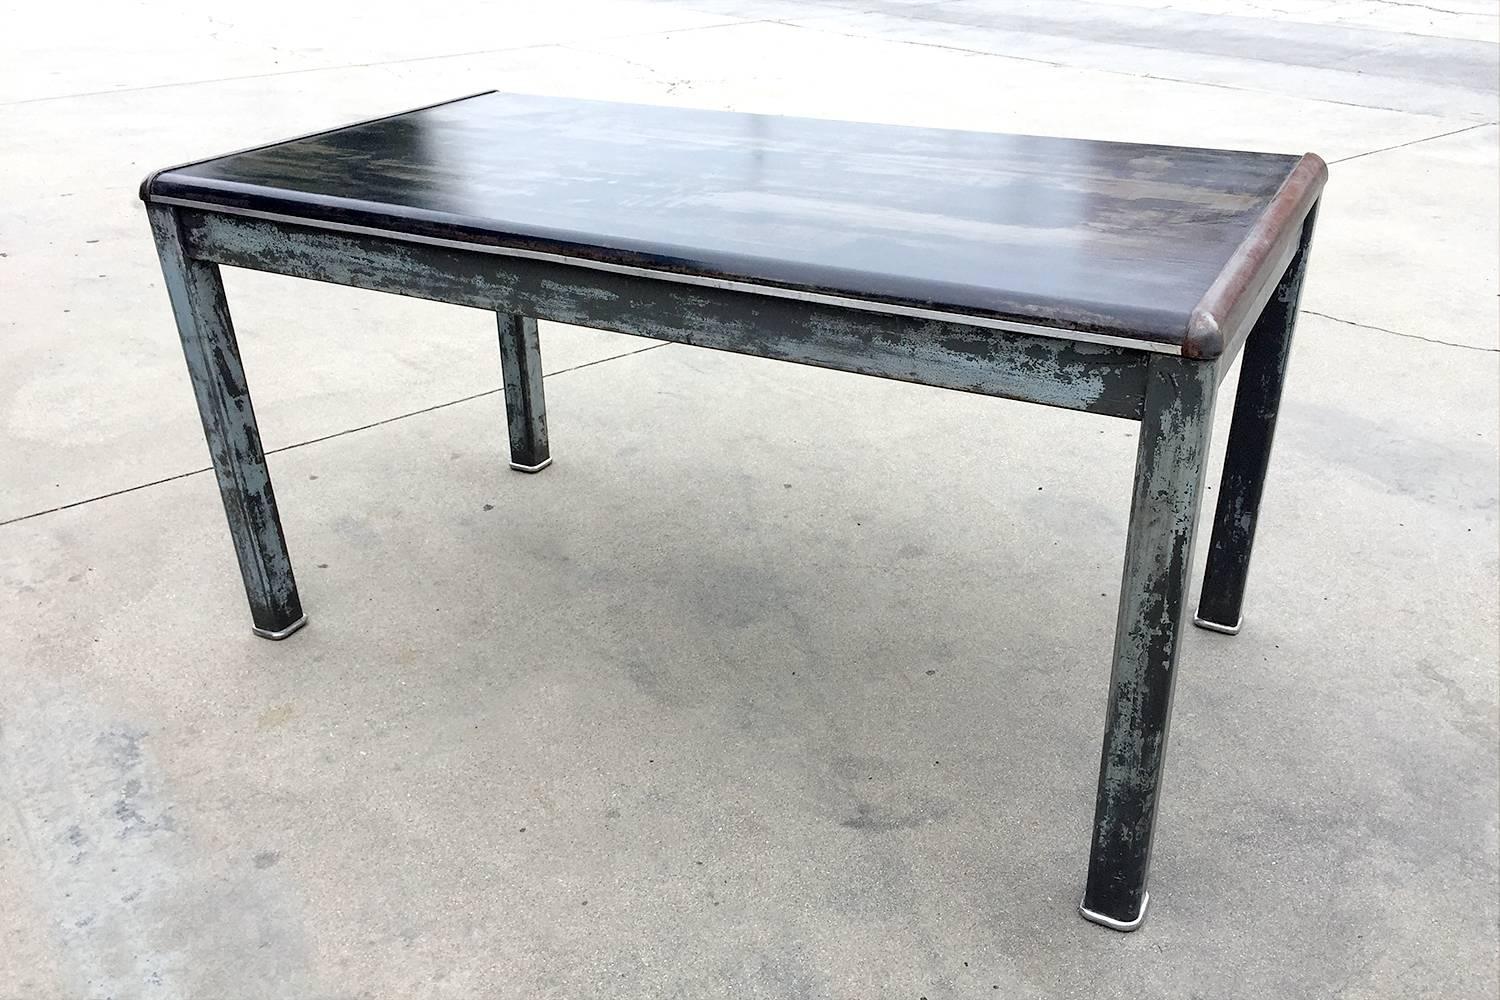 Mid-20th Century 1940s Industrial Tanker Table by Art Metal, Refinished